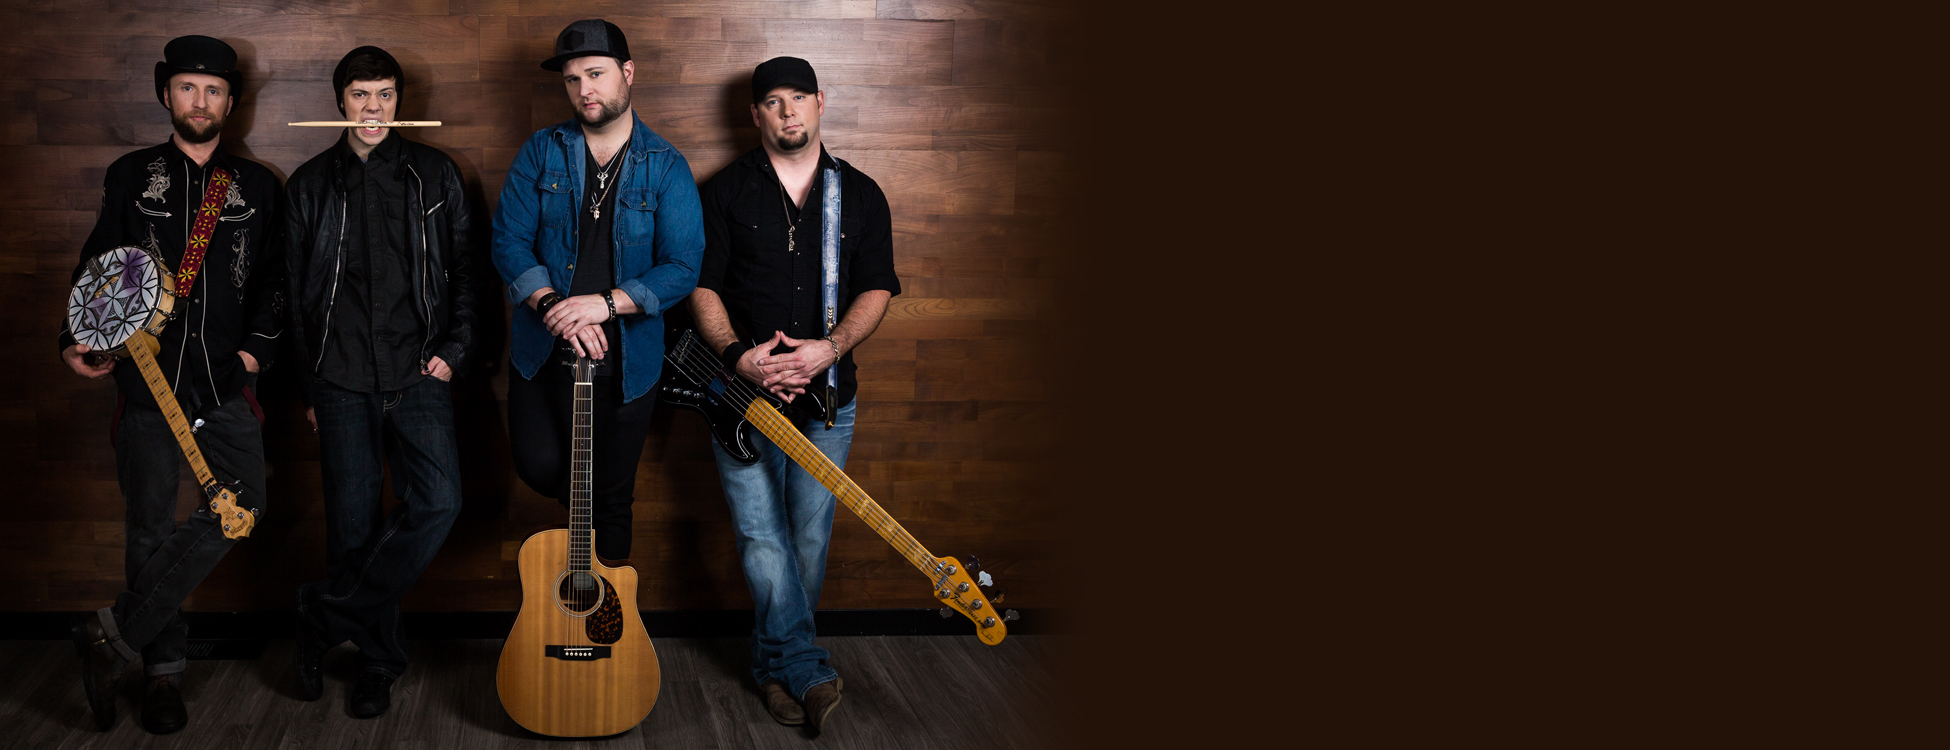 ROYALTY RECORDS WELCOMES CHRIS BUCK BAND TO THE ROSTER!